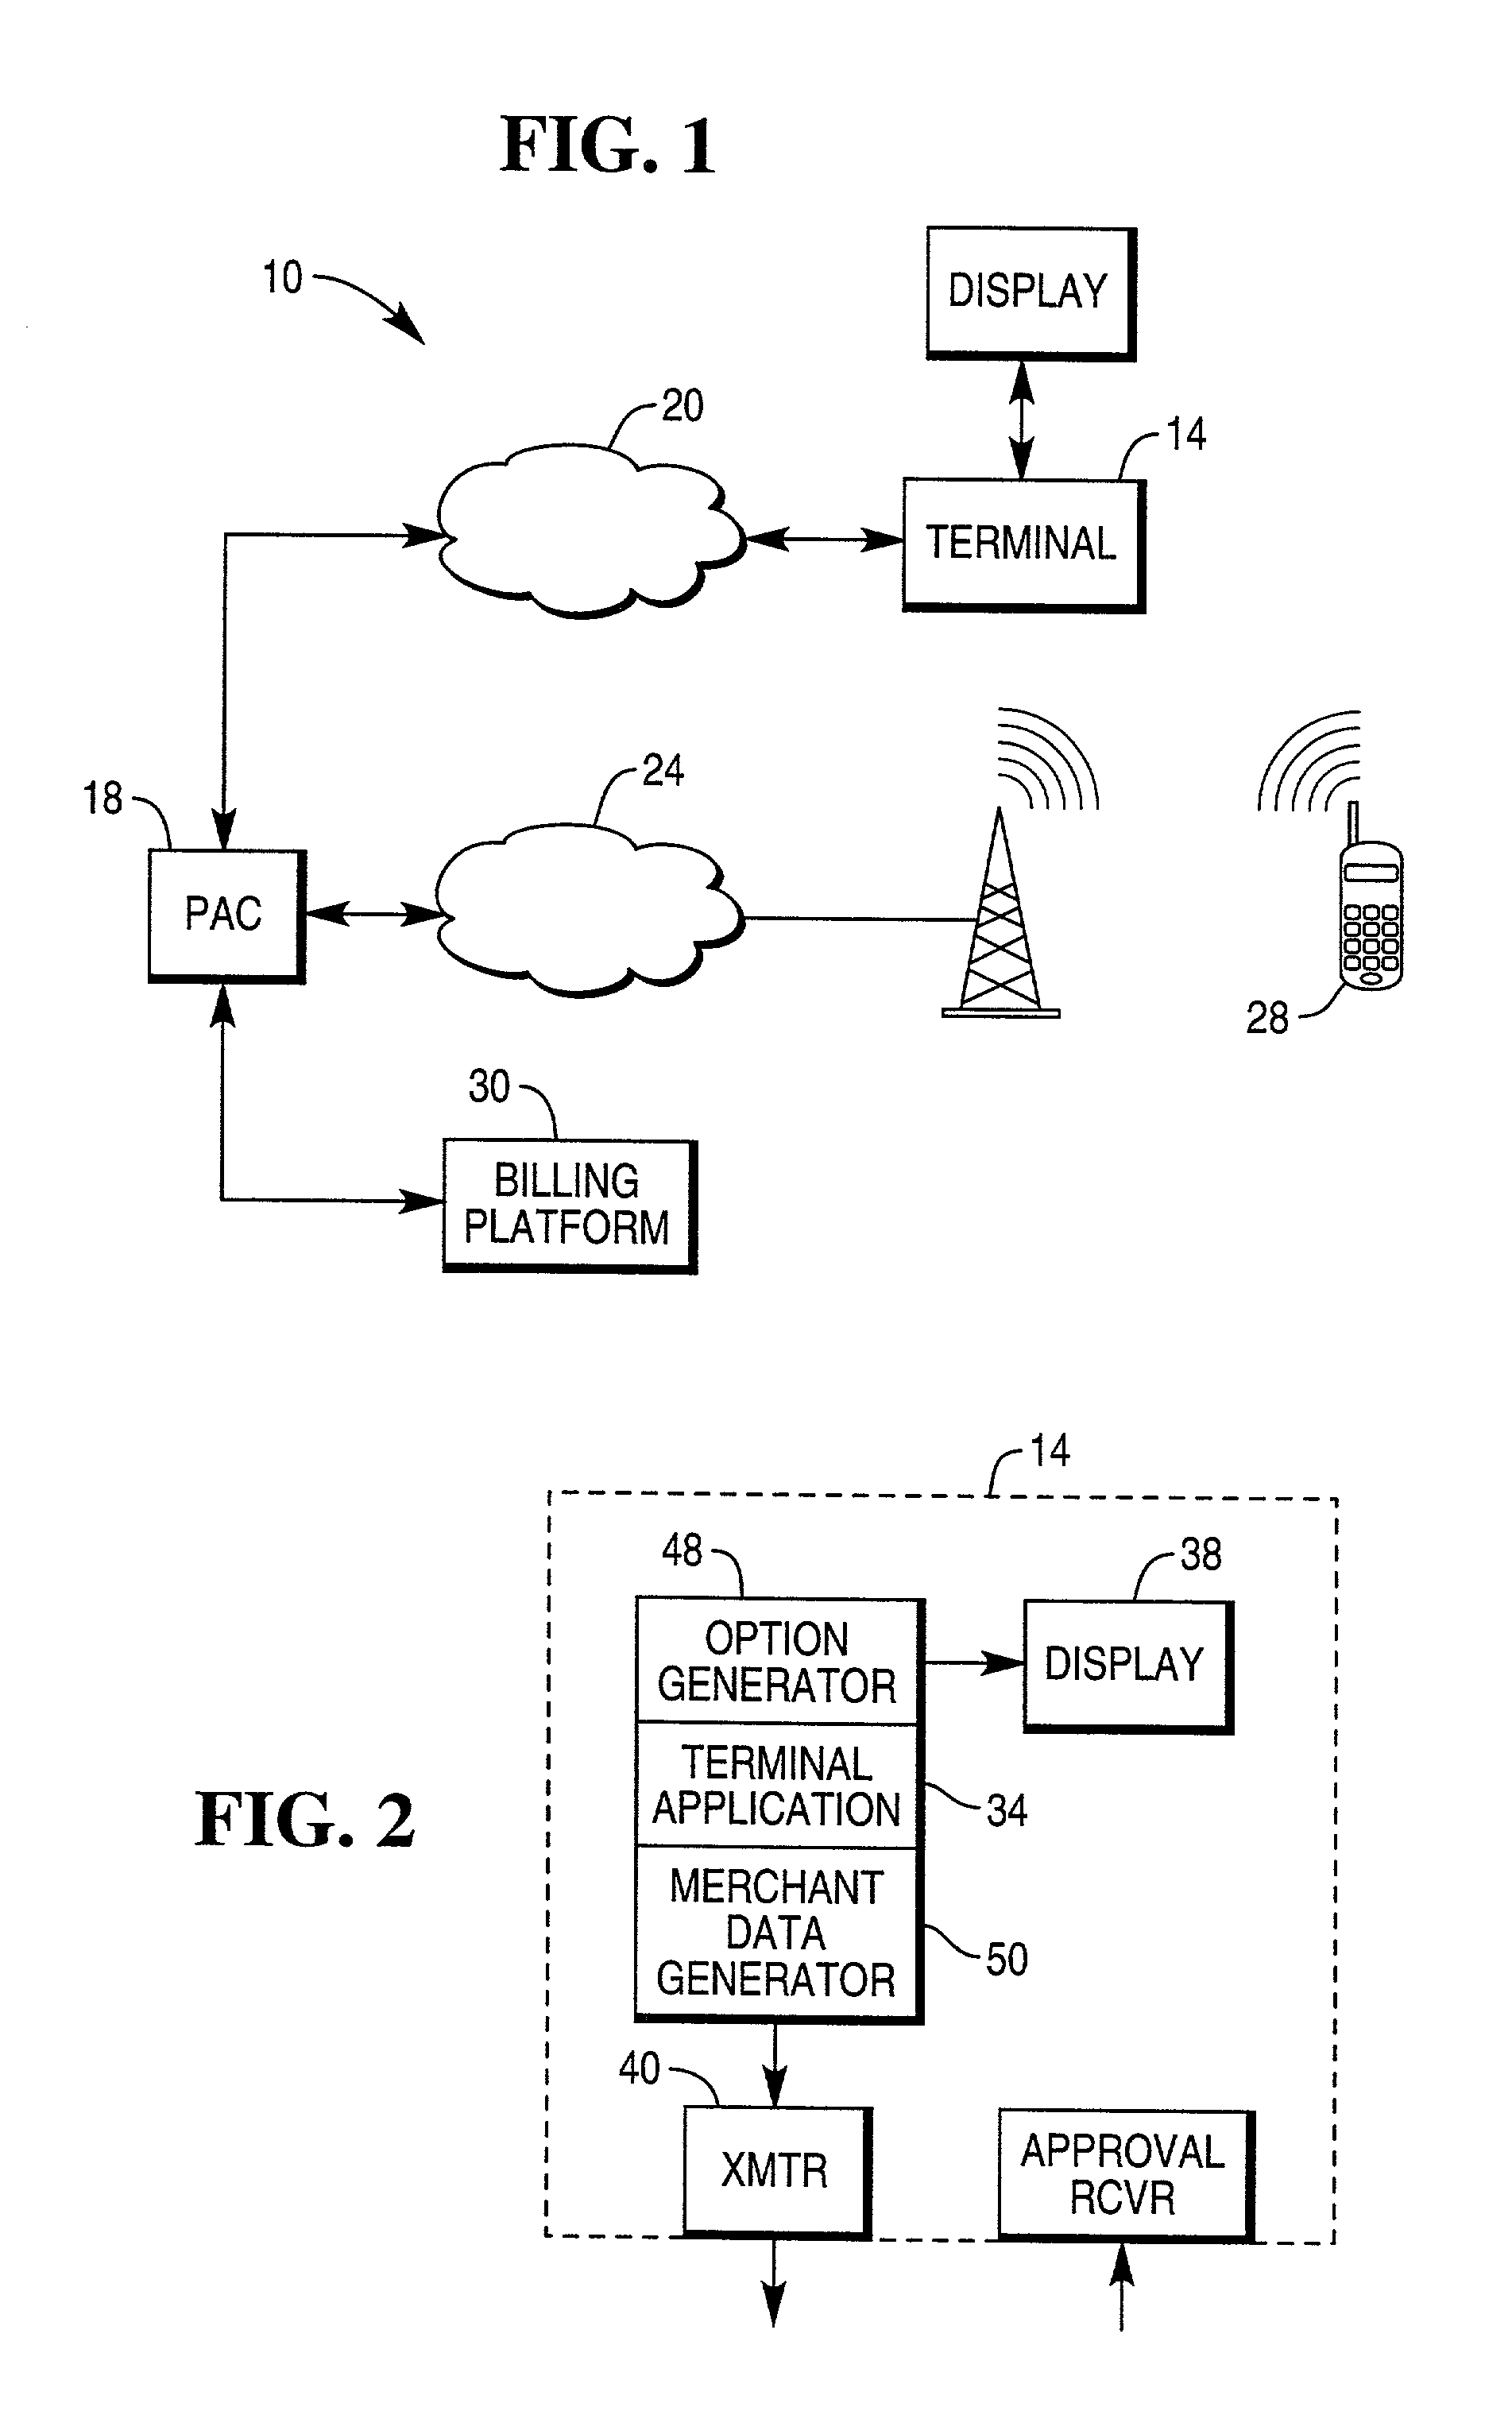 System and method for implementing financial transactions using cellular telephone data